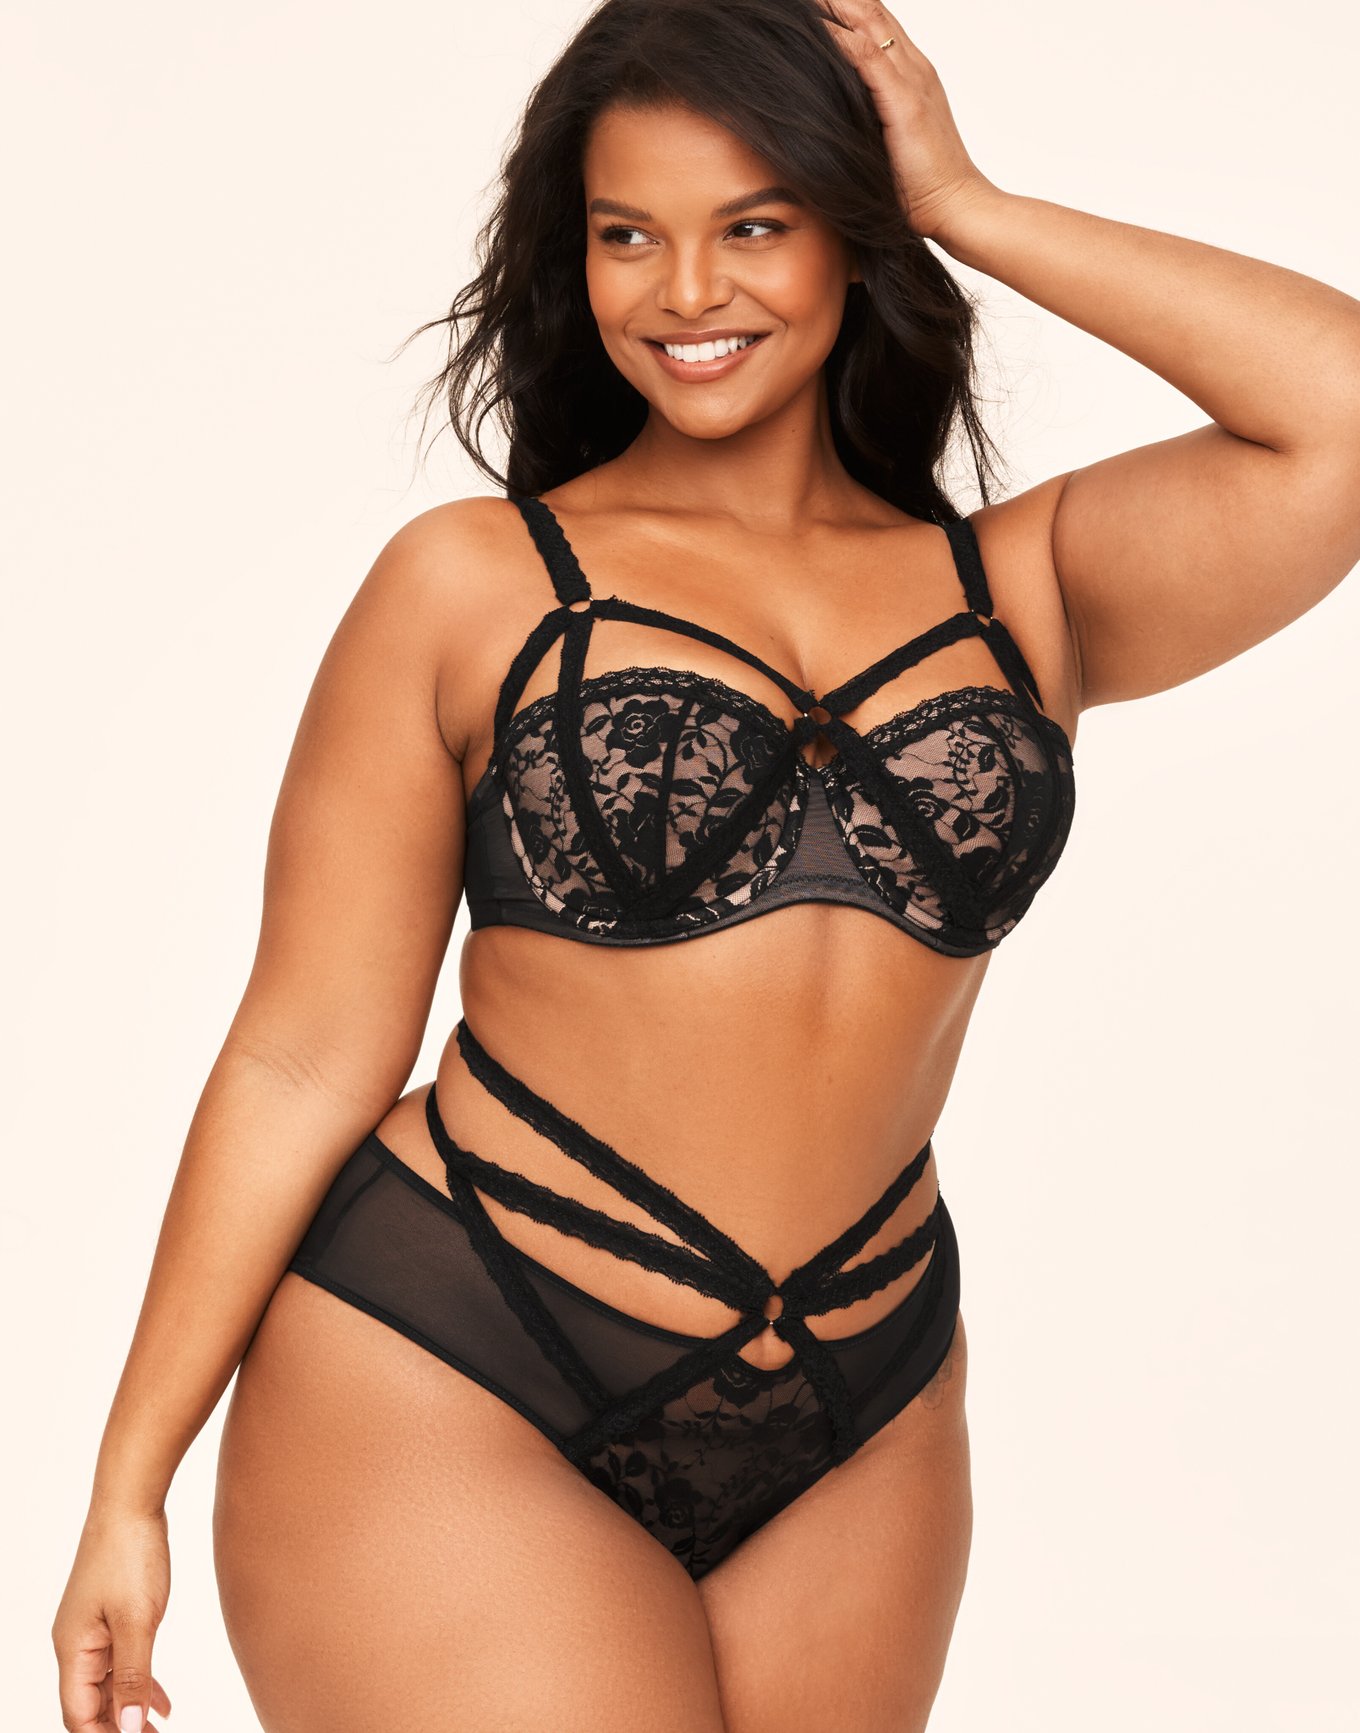 21 Best Bridal Lingerie Sets for Every Budget & Body Shape